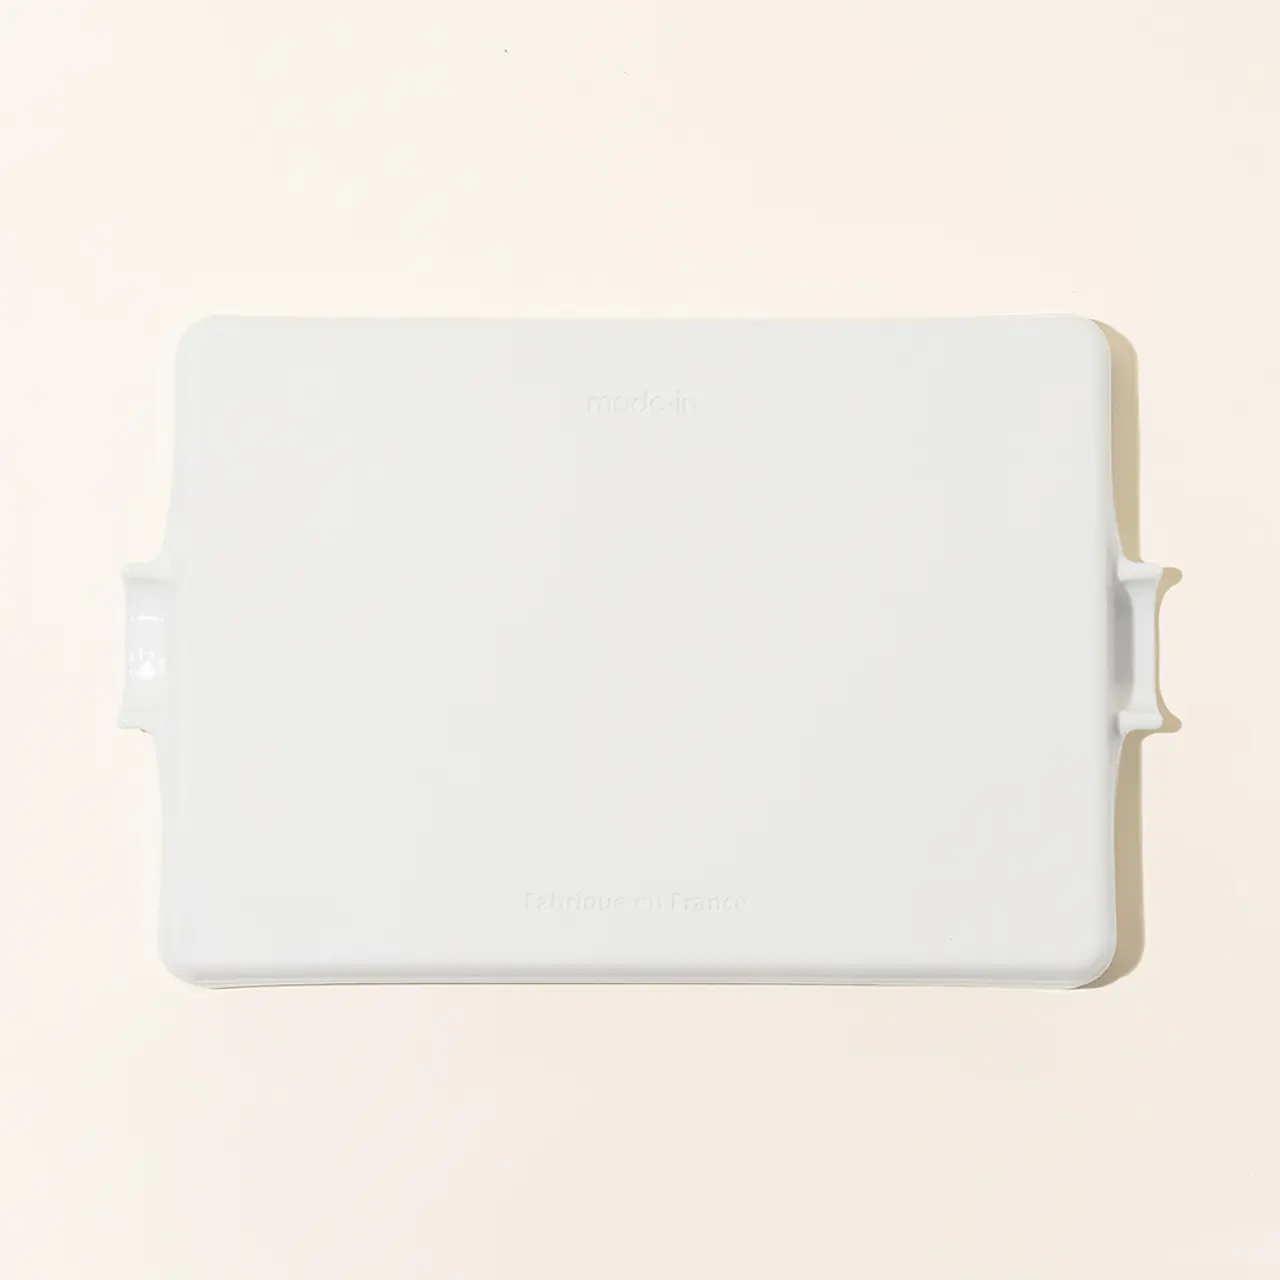 A white, rectangular electronic device with rounded corners and brand text is displayed against a light background.